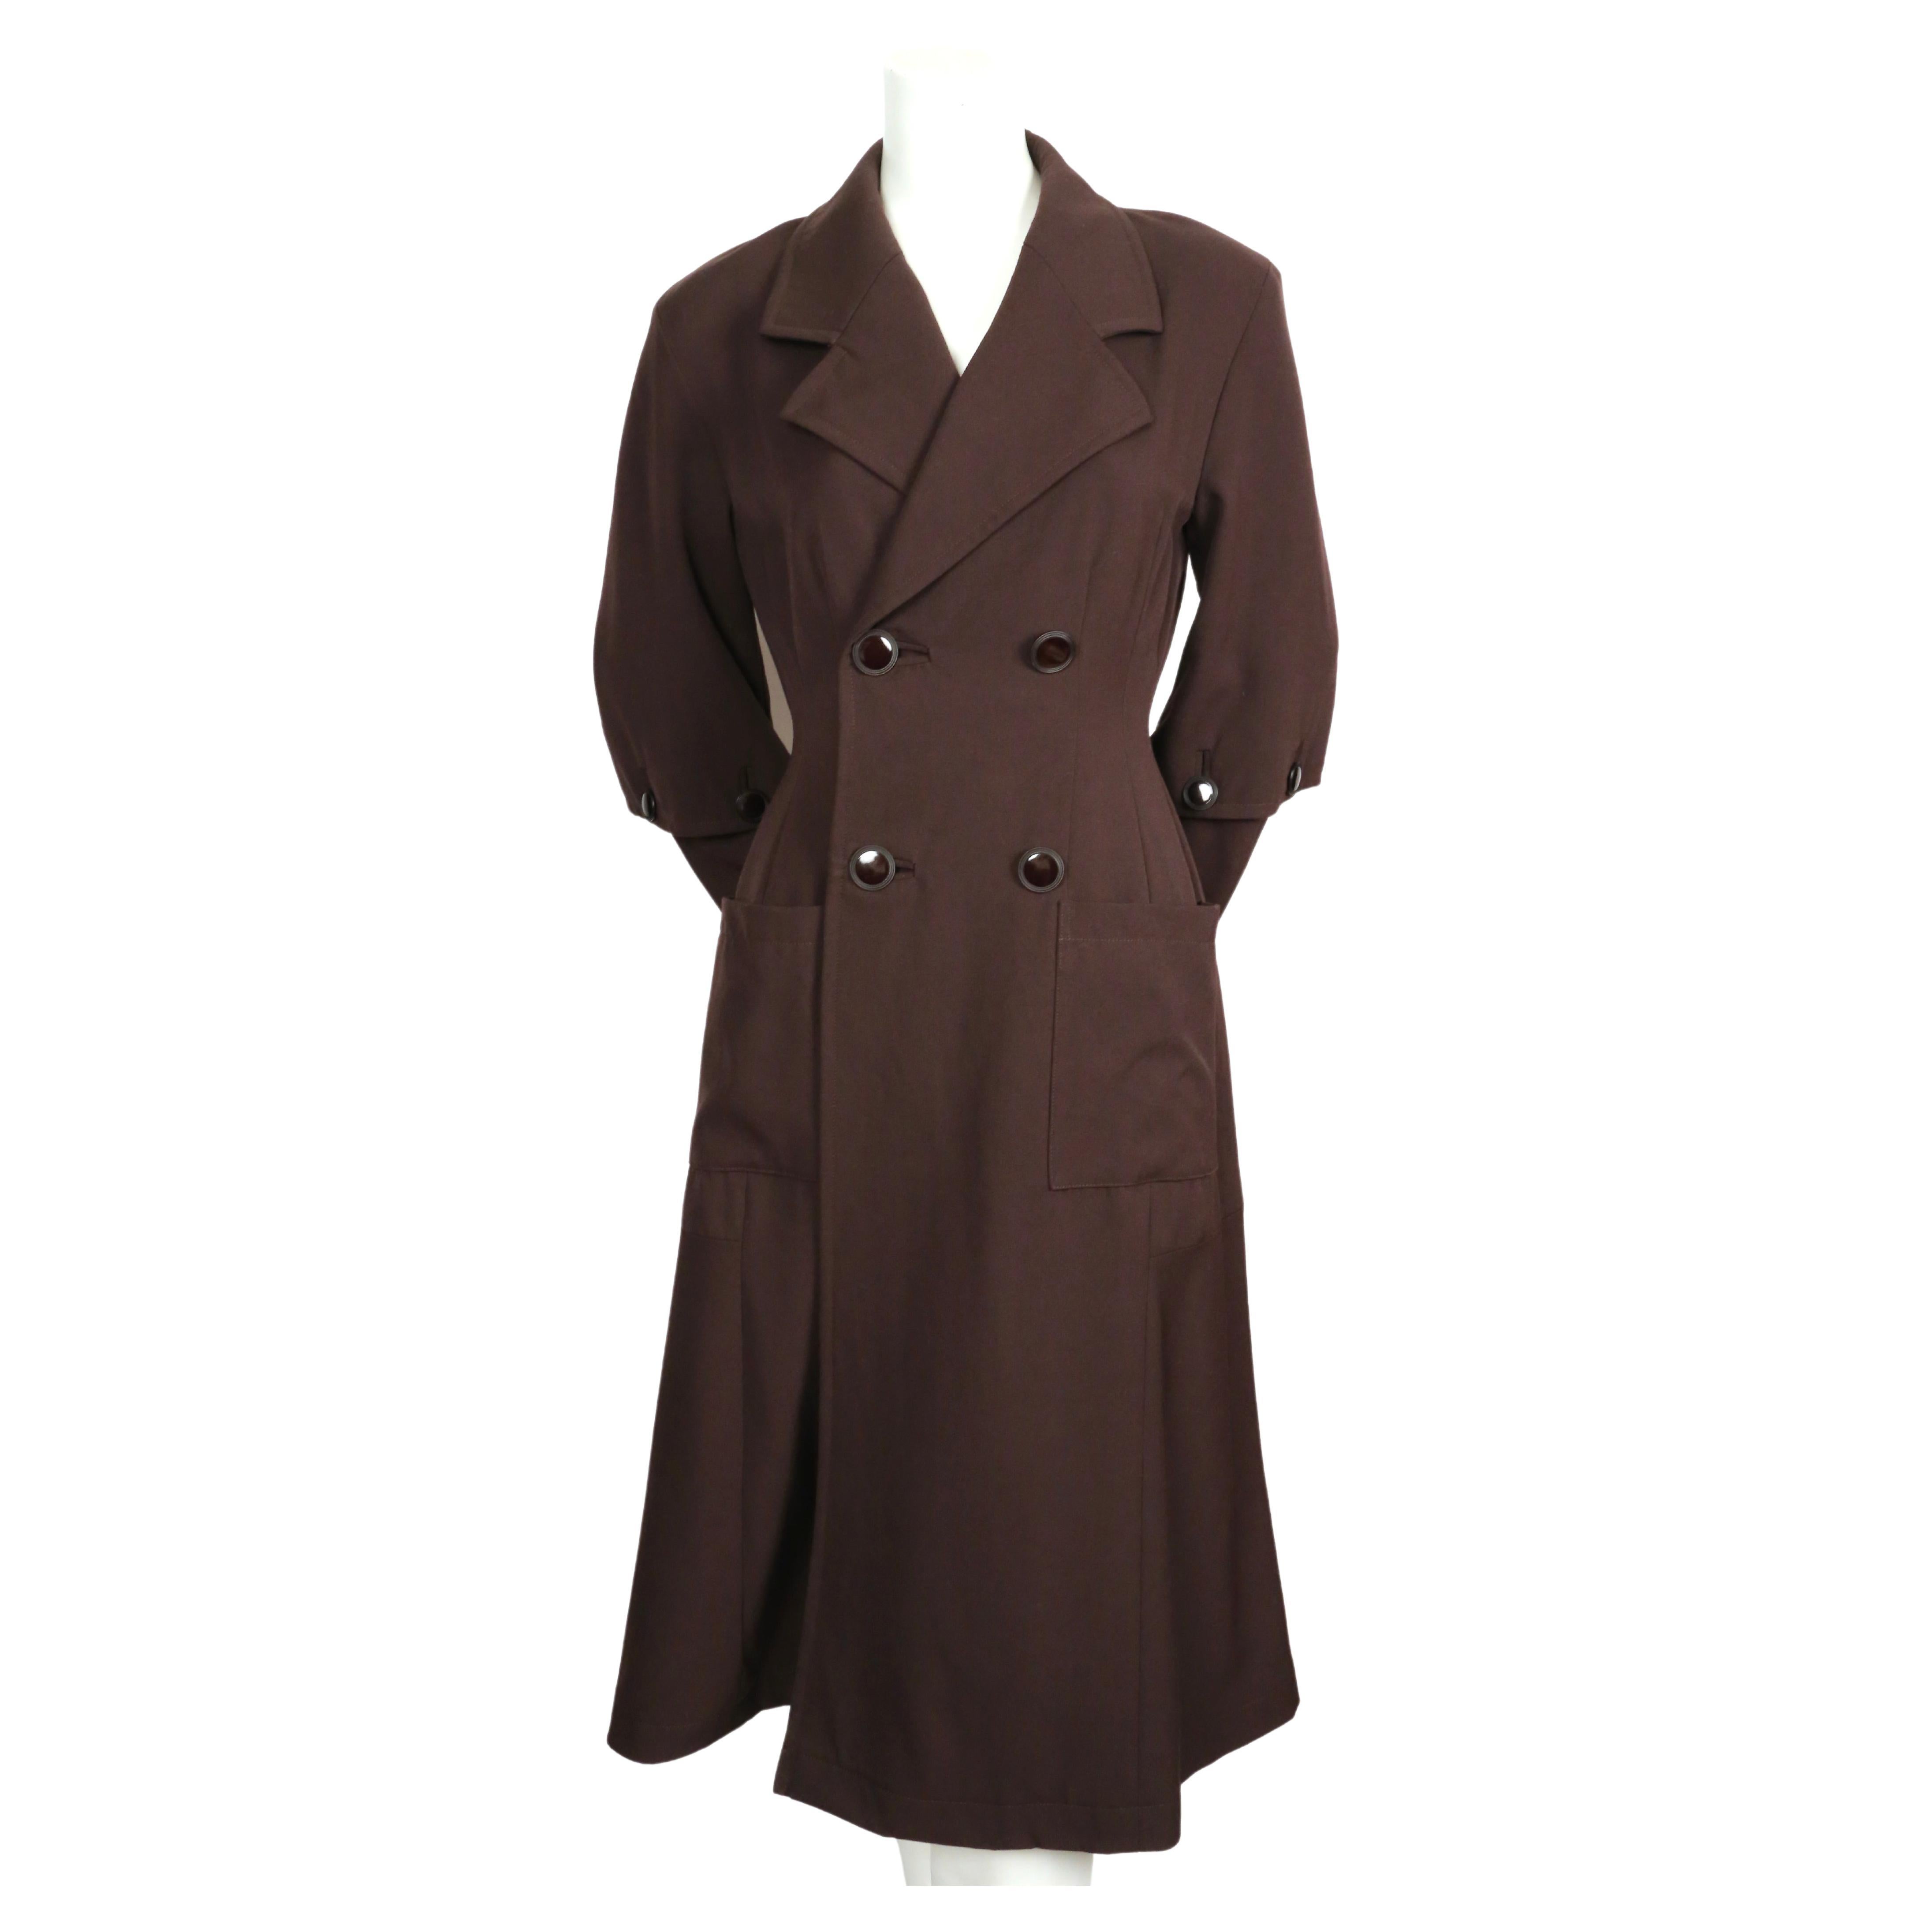 Very unique, dark brown wool coat with button detail at arms and back designed by Yohji Yamamoto dating to 1989 exactly as seen on the runway. Coat has a really great silhouette. Very flattering fit. Coat is labeled a size 'S', which best fits a US